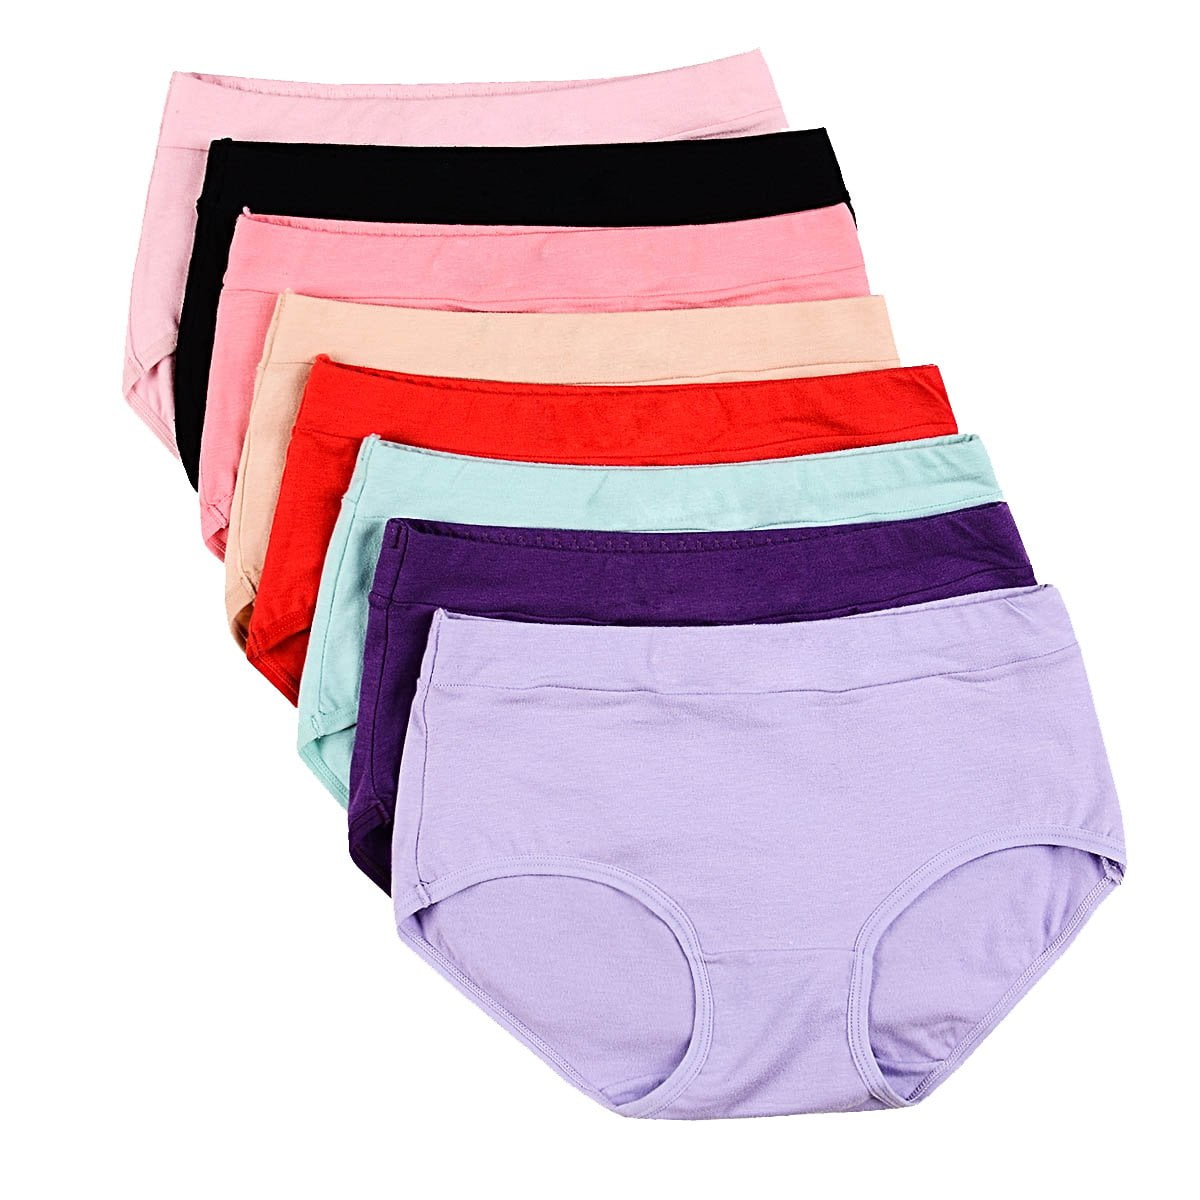 Buankoxy 5 Pack High Waisted Underwear for Women Seamless Panties Ladies  Invisible Briefs(Size 8)